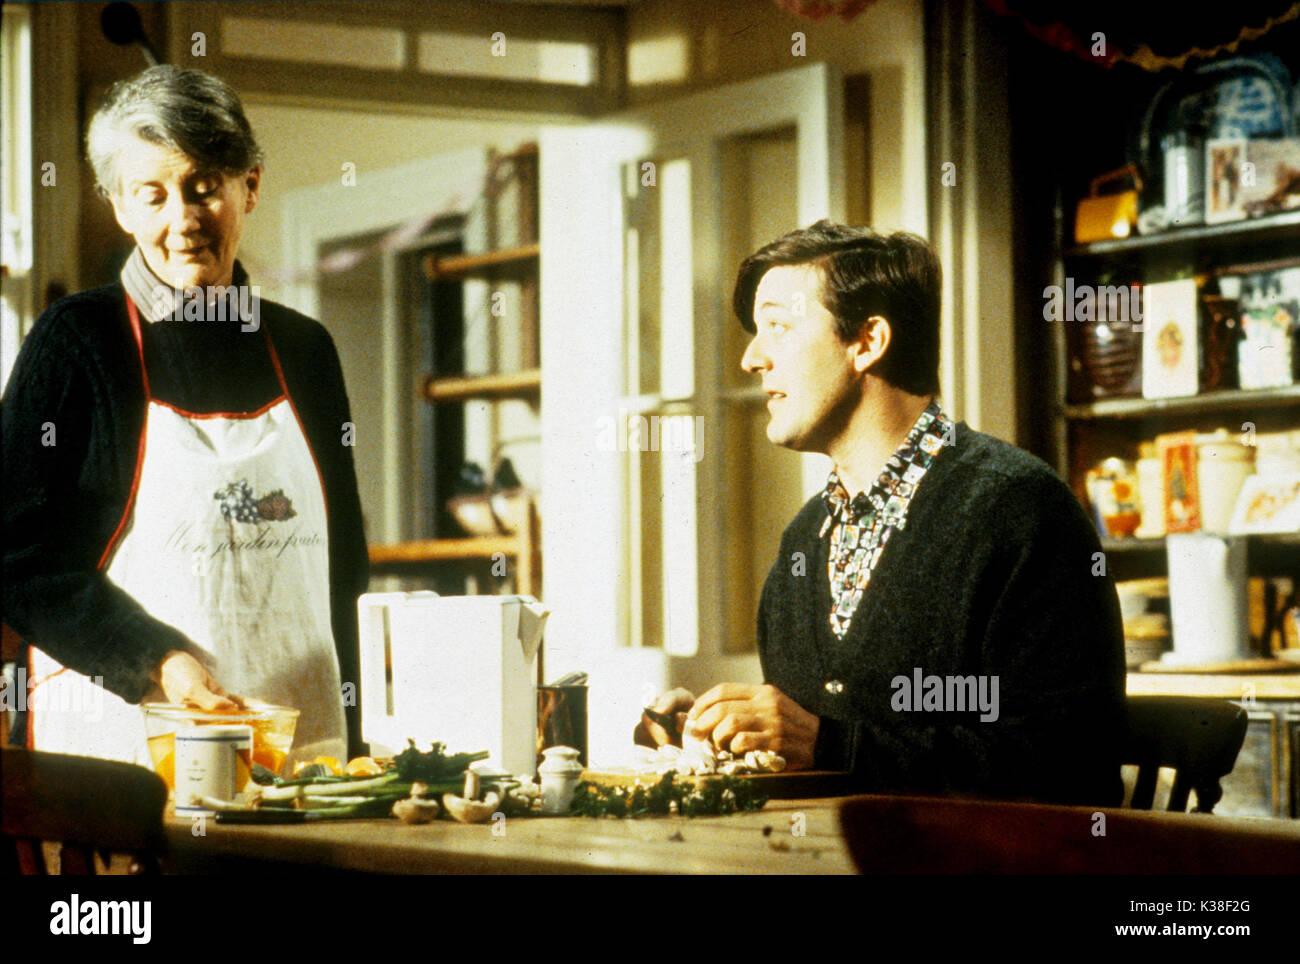 PETER'S FRIENDS (UK 1992) BBC FILMS/CHANNEL 4 FILMS/RENAISSANCE FILMS/SAMUEL GOLDWYN COMPANY PHYLLIDA LAW, STEPHEN FRY Picture from the Ronald Grant Archive PETER'S FRIENDS (UK 1992) BBC FILMS/CHANNEL 4 FILMS/RENAISSANCE FILMS/SAMUEL GOLDWYN COMPANY PHYLLIDA LAW, STEPHEN FRY     Date: 1992 Stock Photo